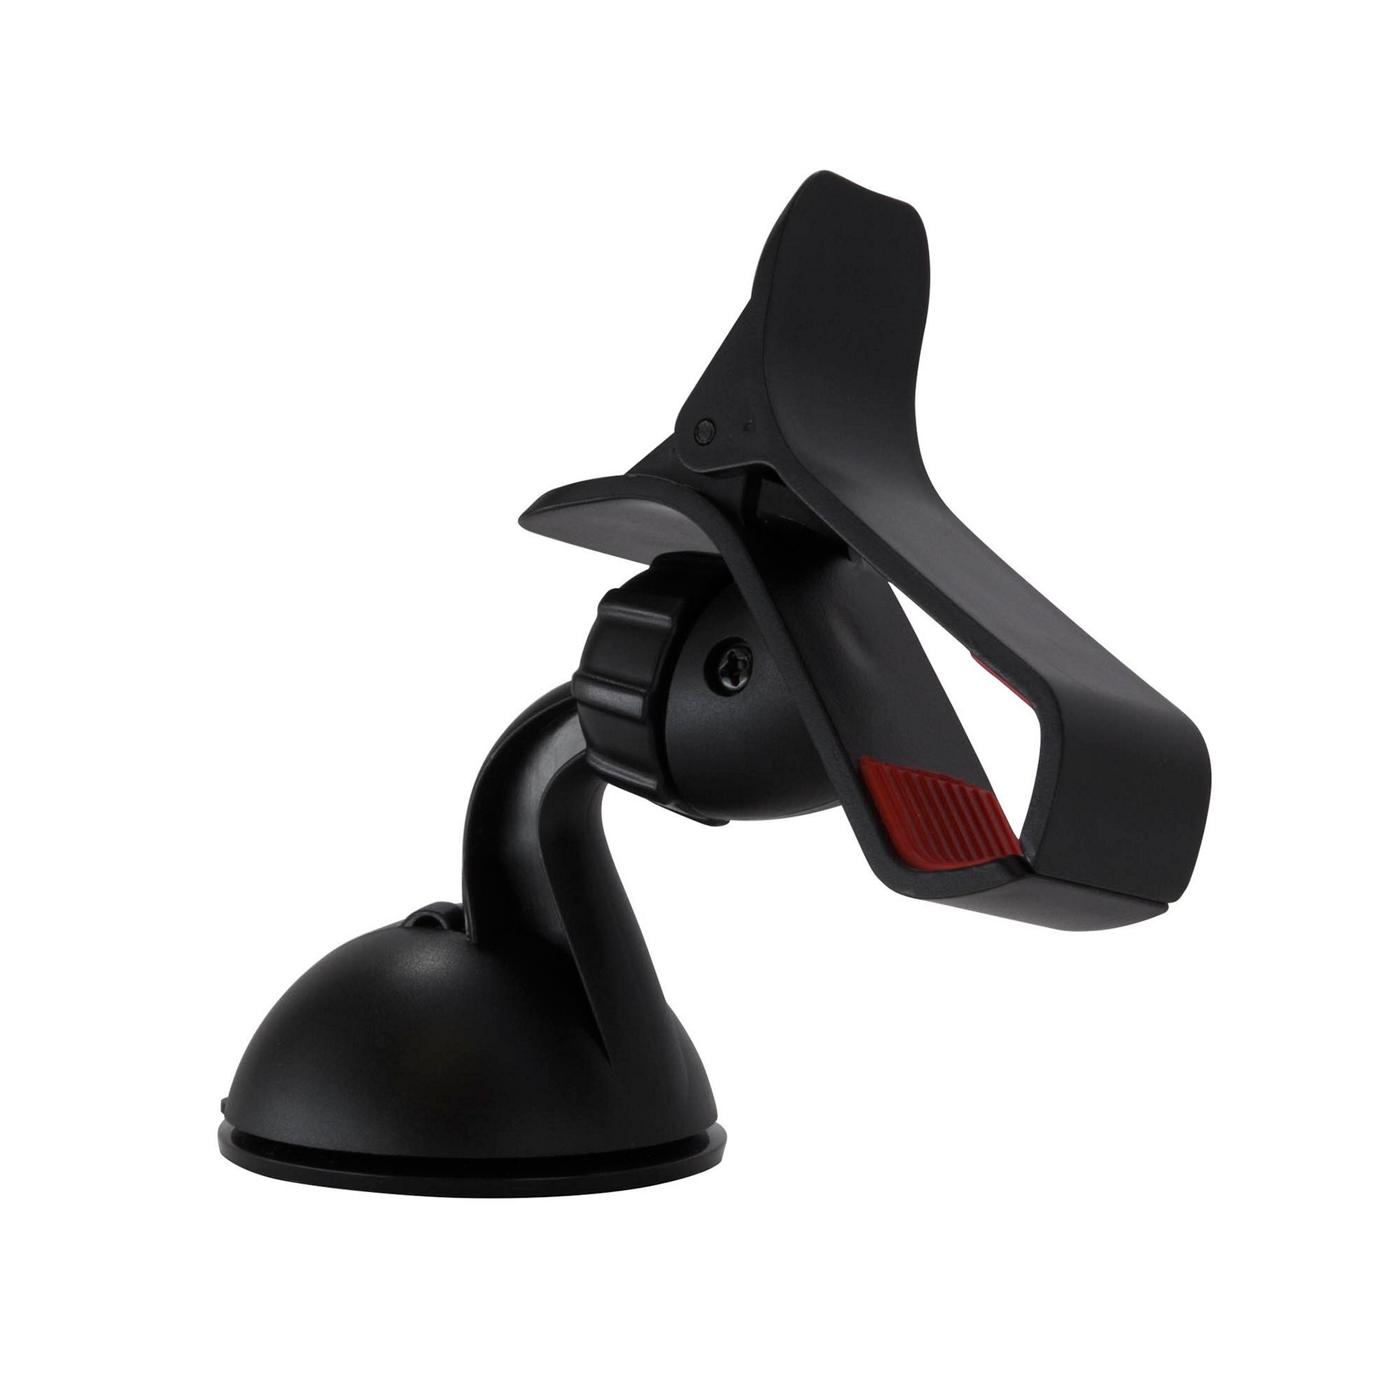 iHome Suction Cup Car Mount - Black; image 2 of 2